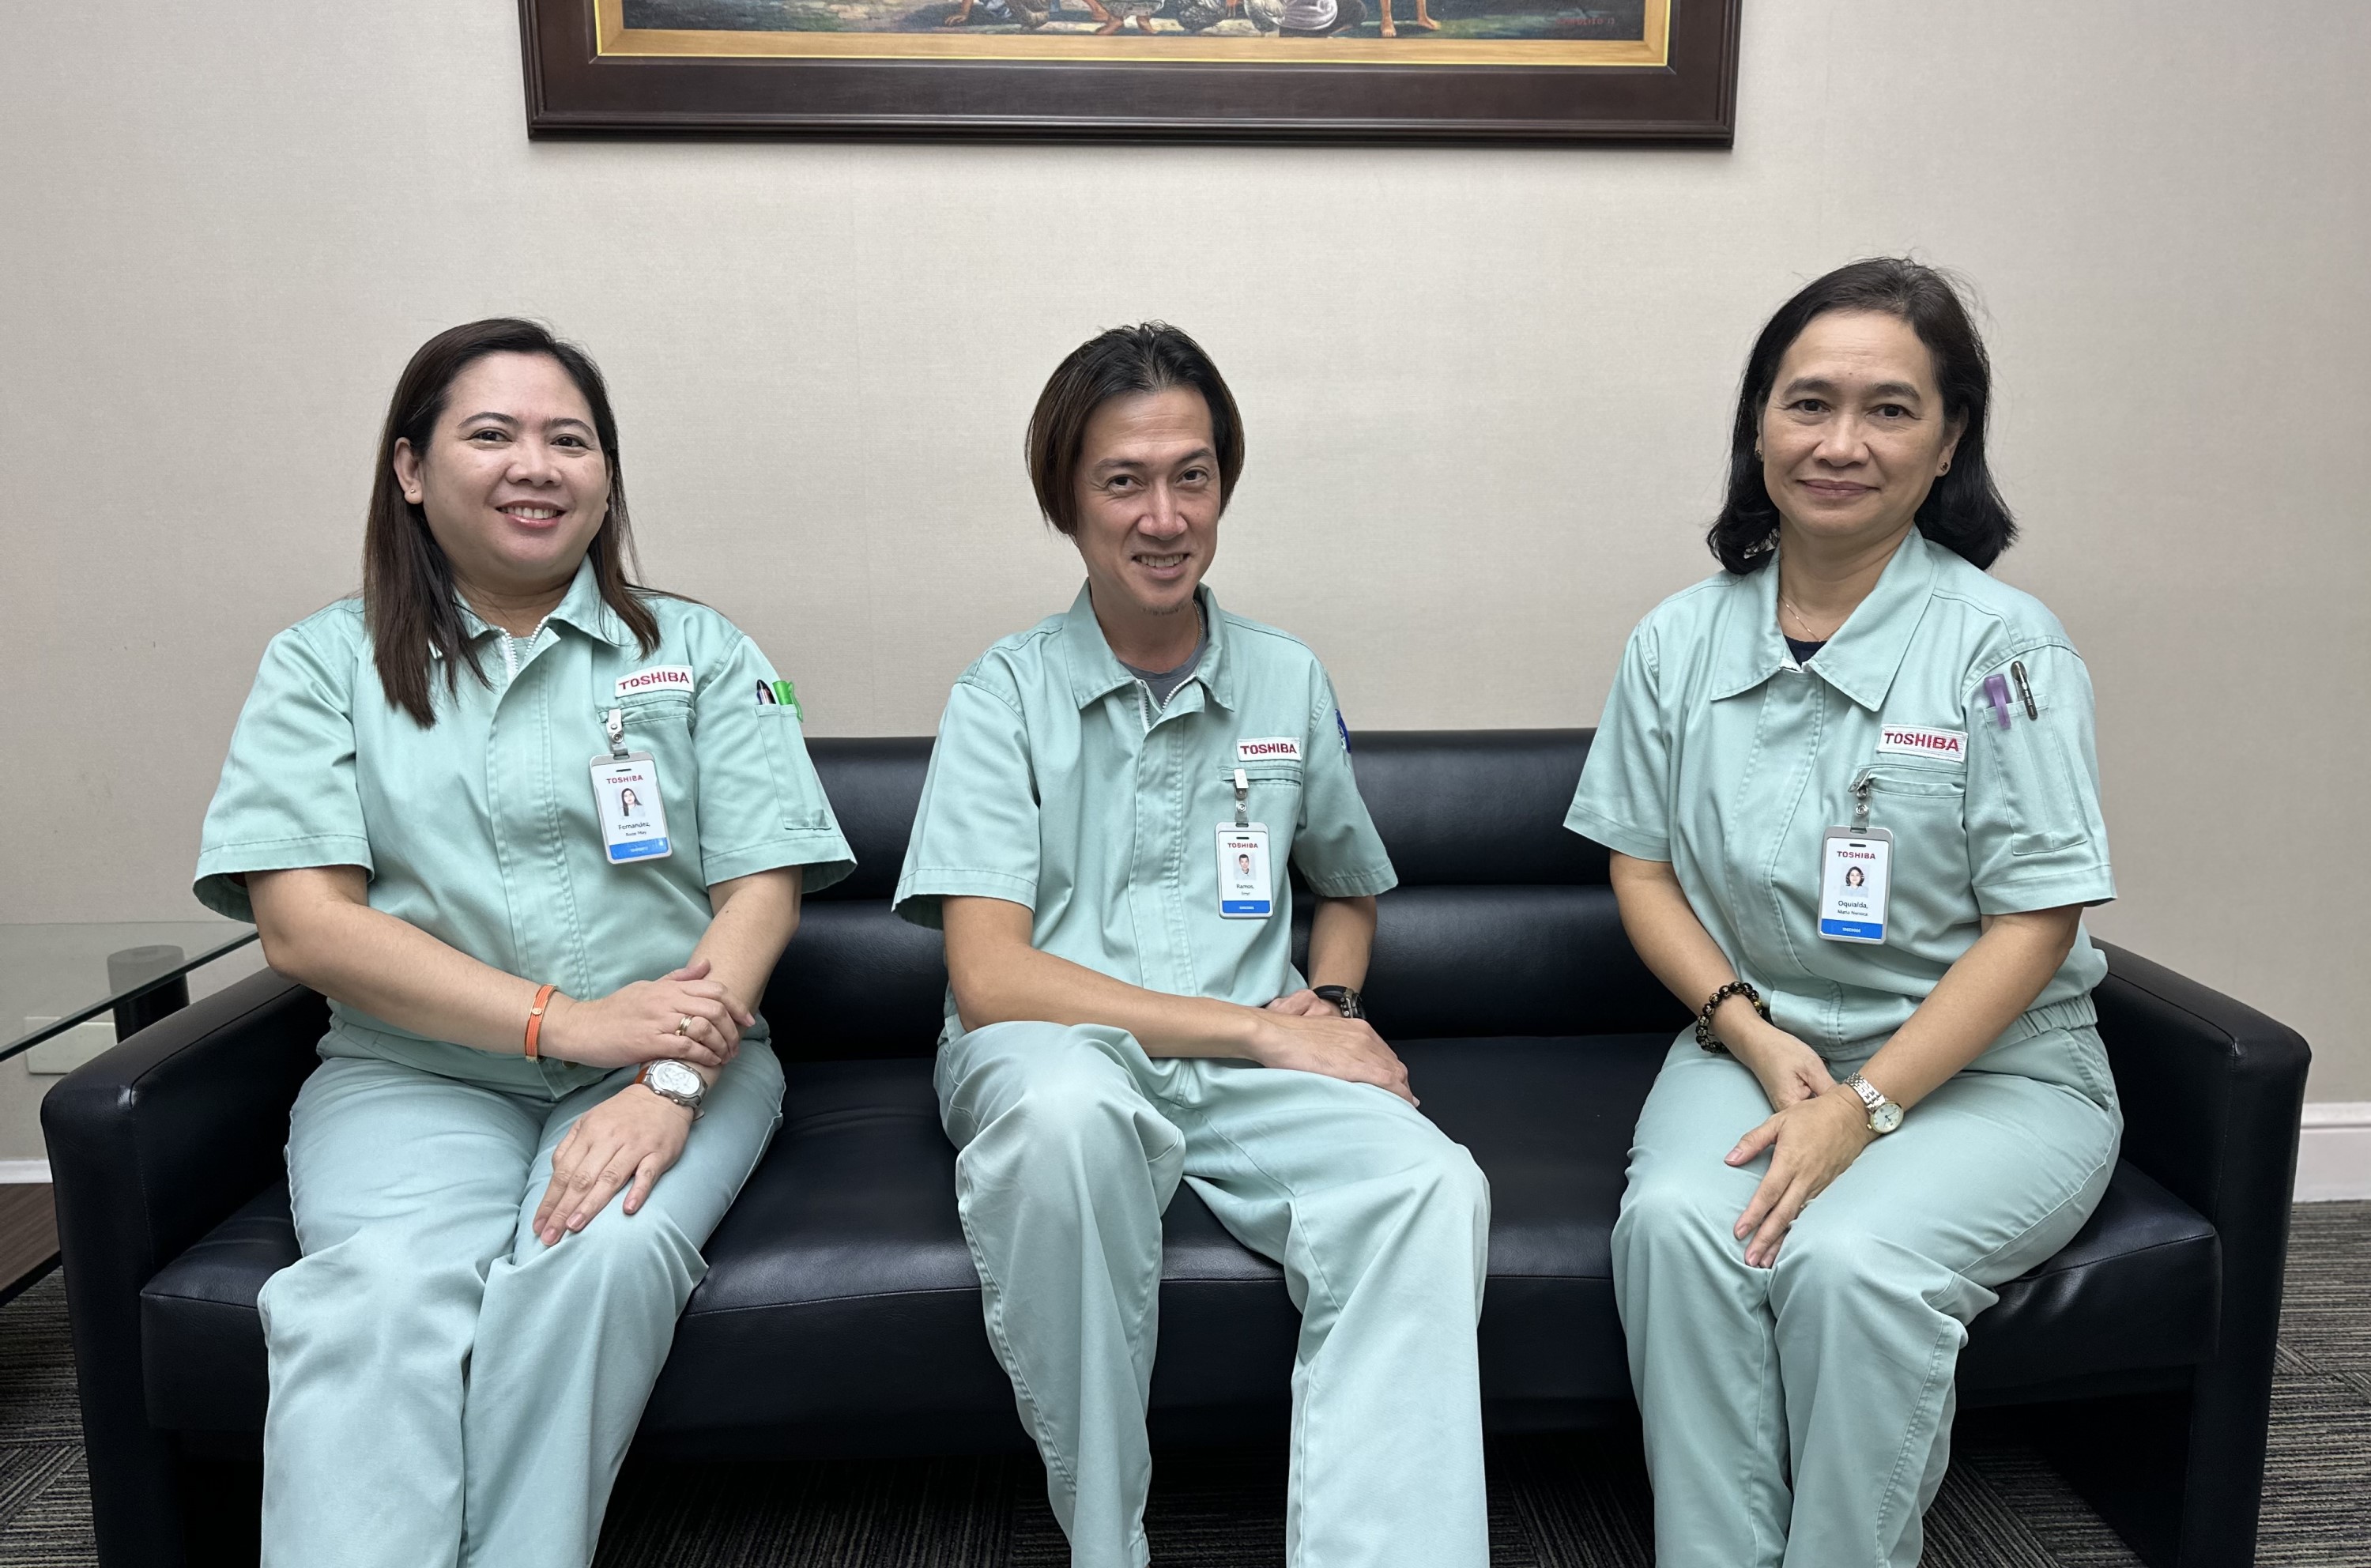 From left: Fernandez Rosiemay, Human Resources Manager, Ramos Emyr General Affairs Manager, Nenoca Oquialda, Procurement Manager, Toshiba Information Equipment (Philippines), Inc.